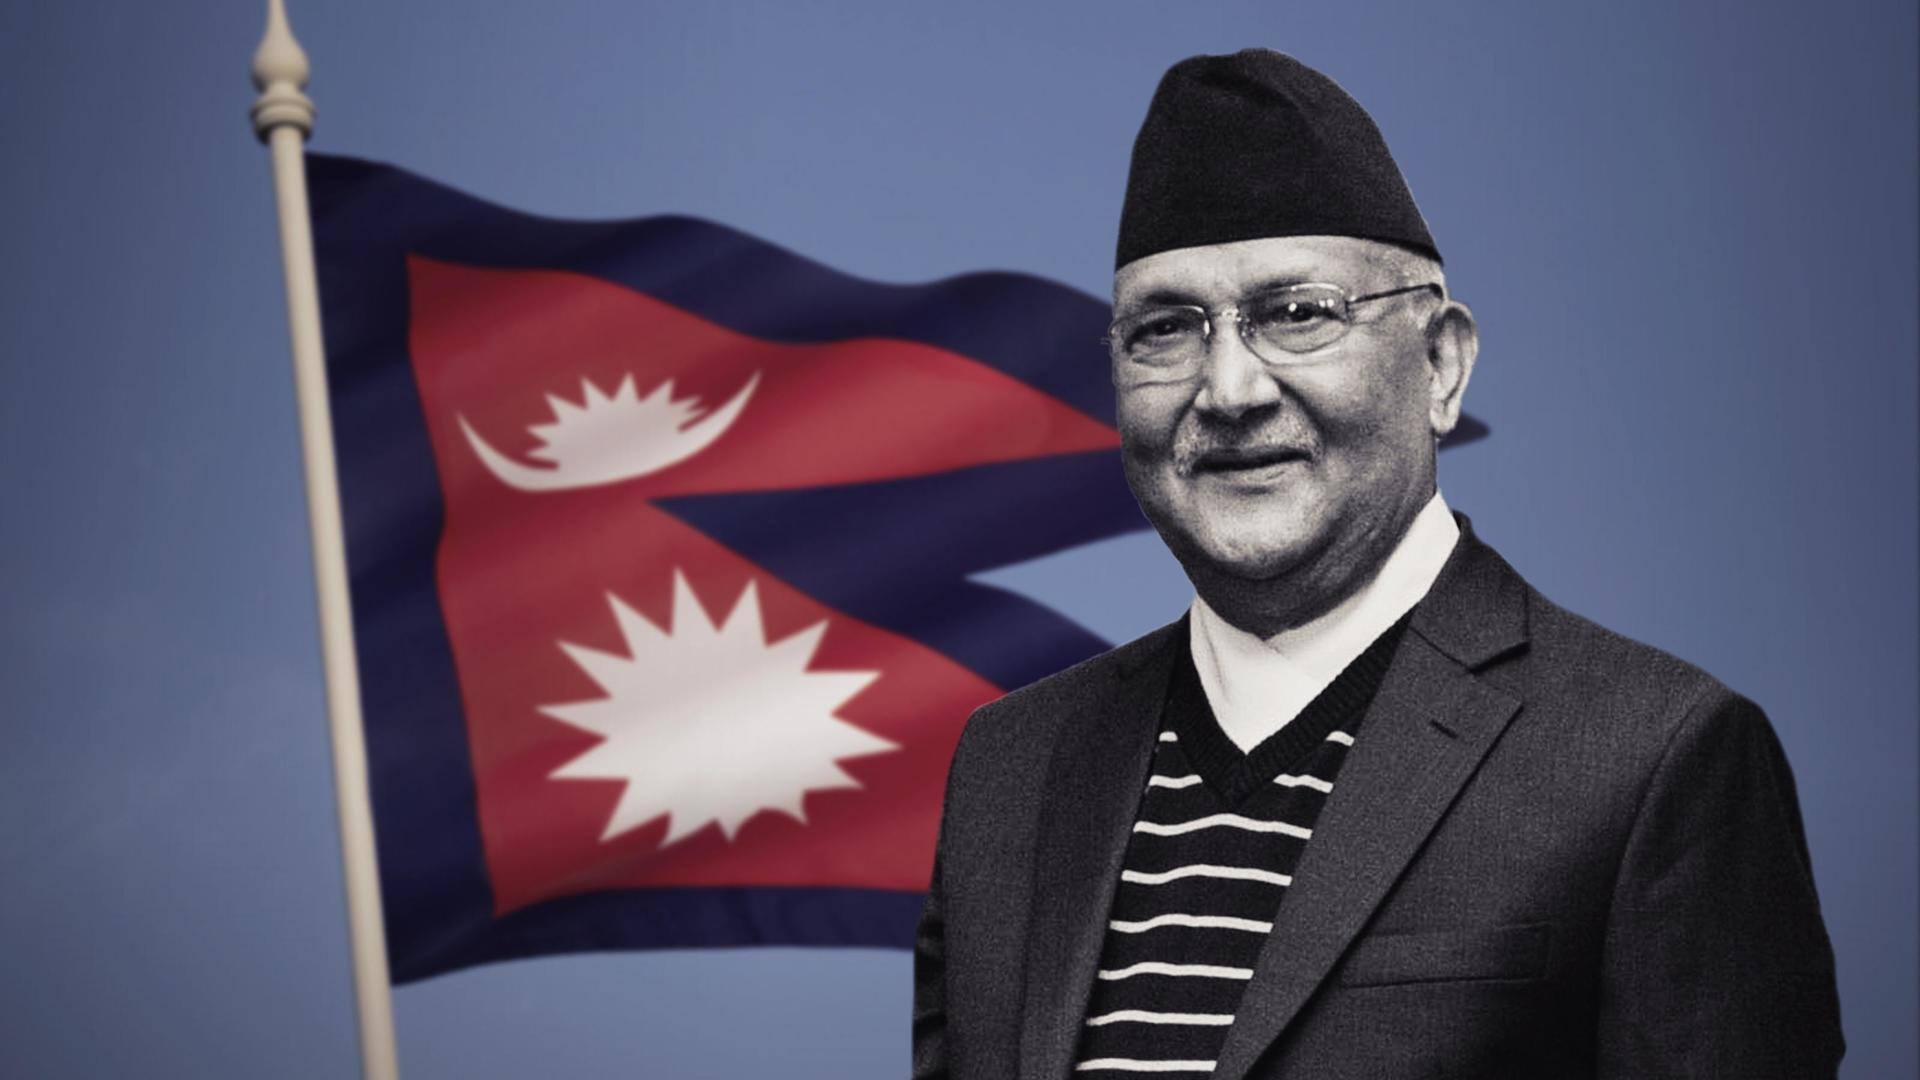 Will bring back Nepal's territories from India if elected: Oli